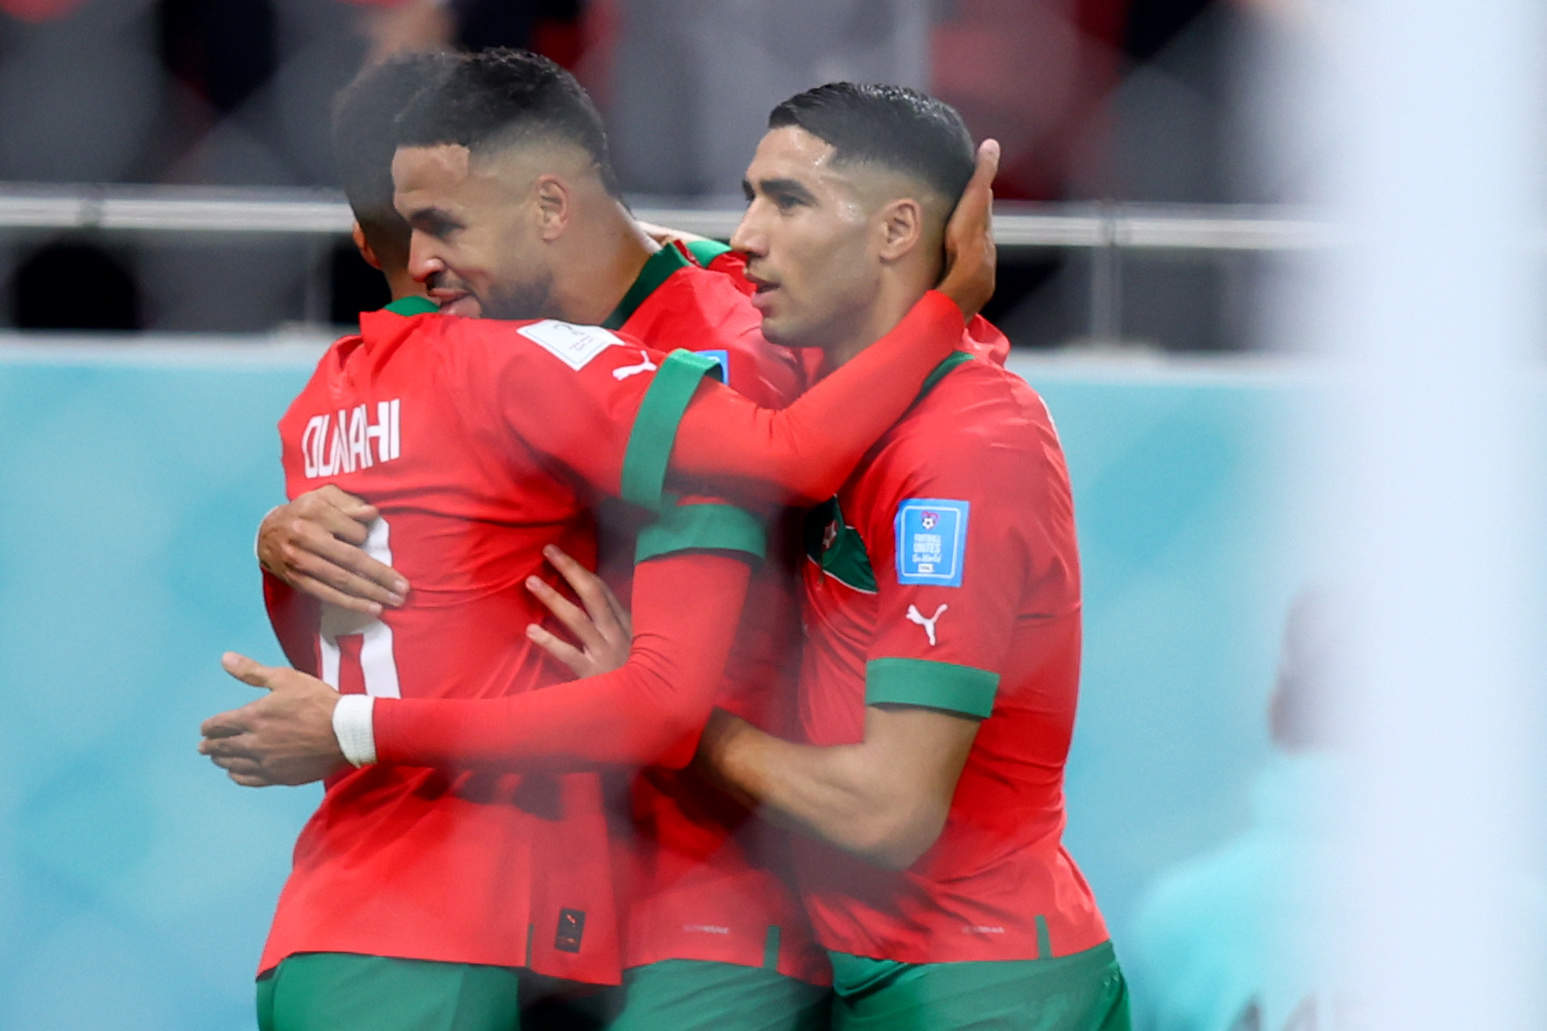 10 December 2022, Qatar, Doha: Morocco's Youssef En-Nesyri celebrates scoring his side's first goal with teammates Morocco's Achraf Hakimi (R) and Azzedine Ounahi during the FIFA World Cup Qatar 2022 Quarter-Final soccer match between Morocco and Portugal at Al-Thumama stadium. Photo: Tom Weller/dpa